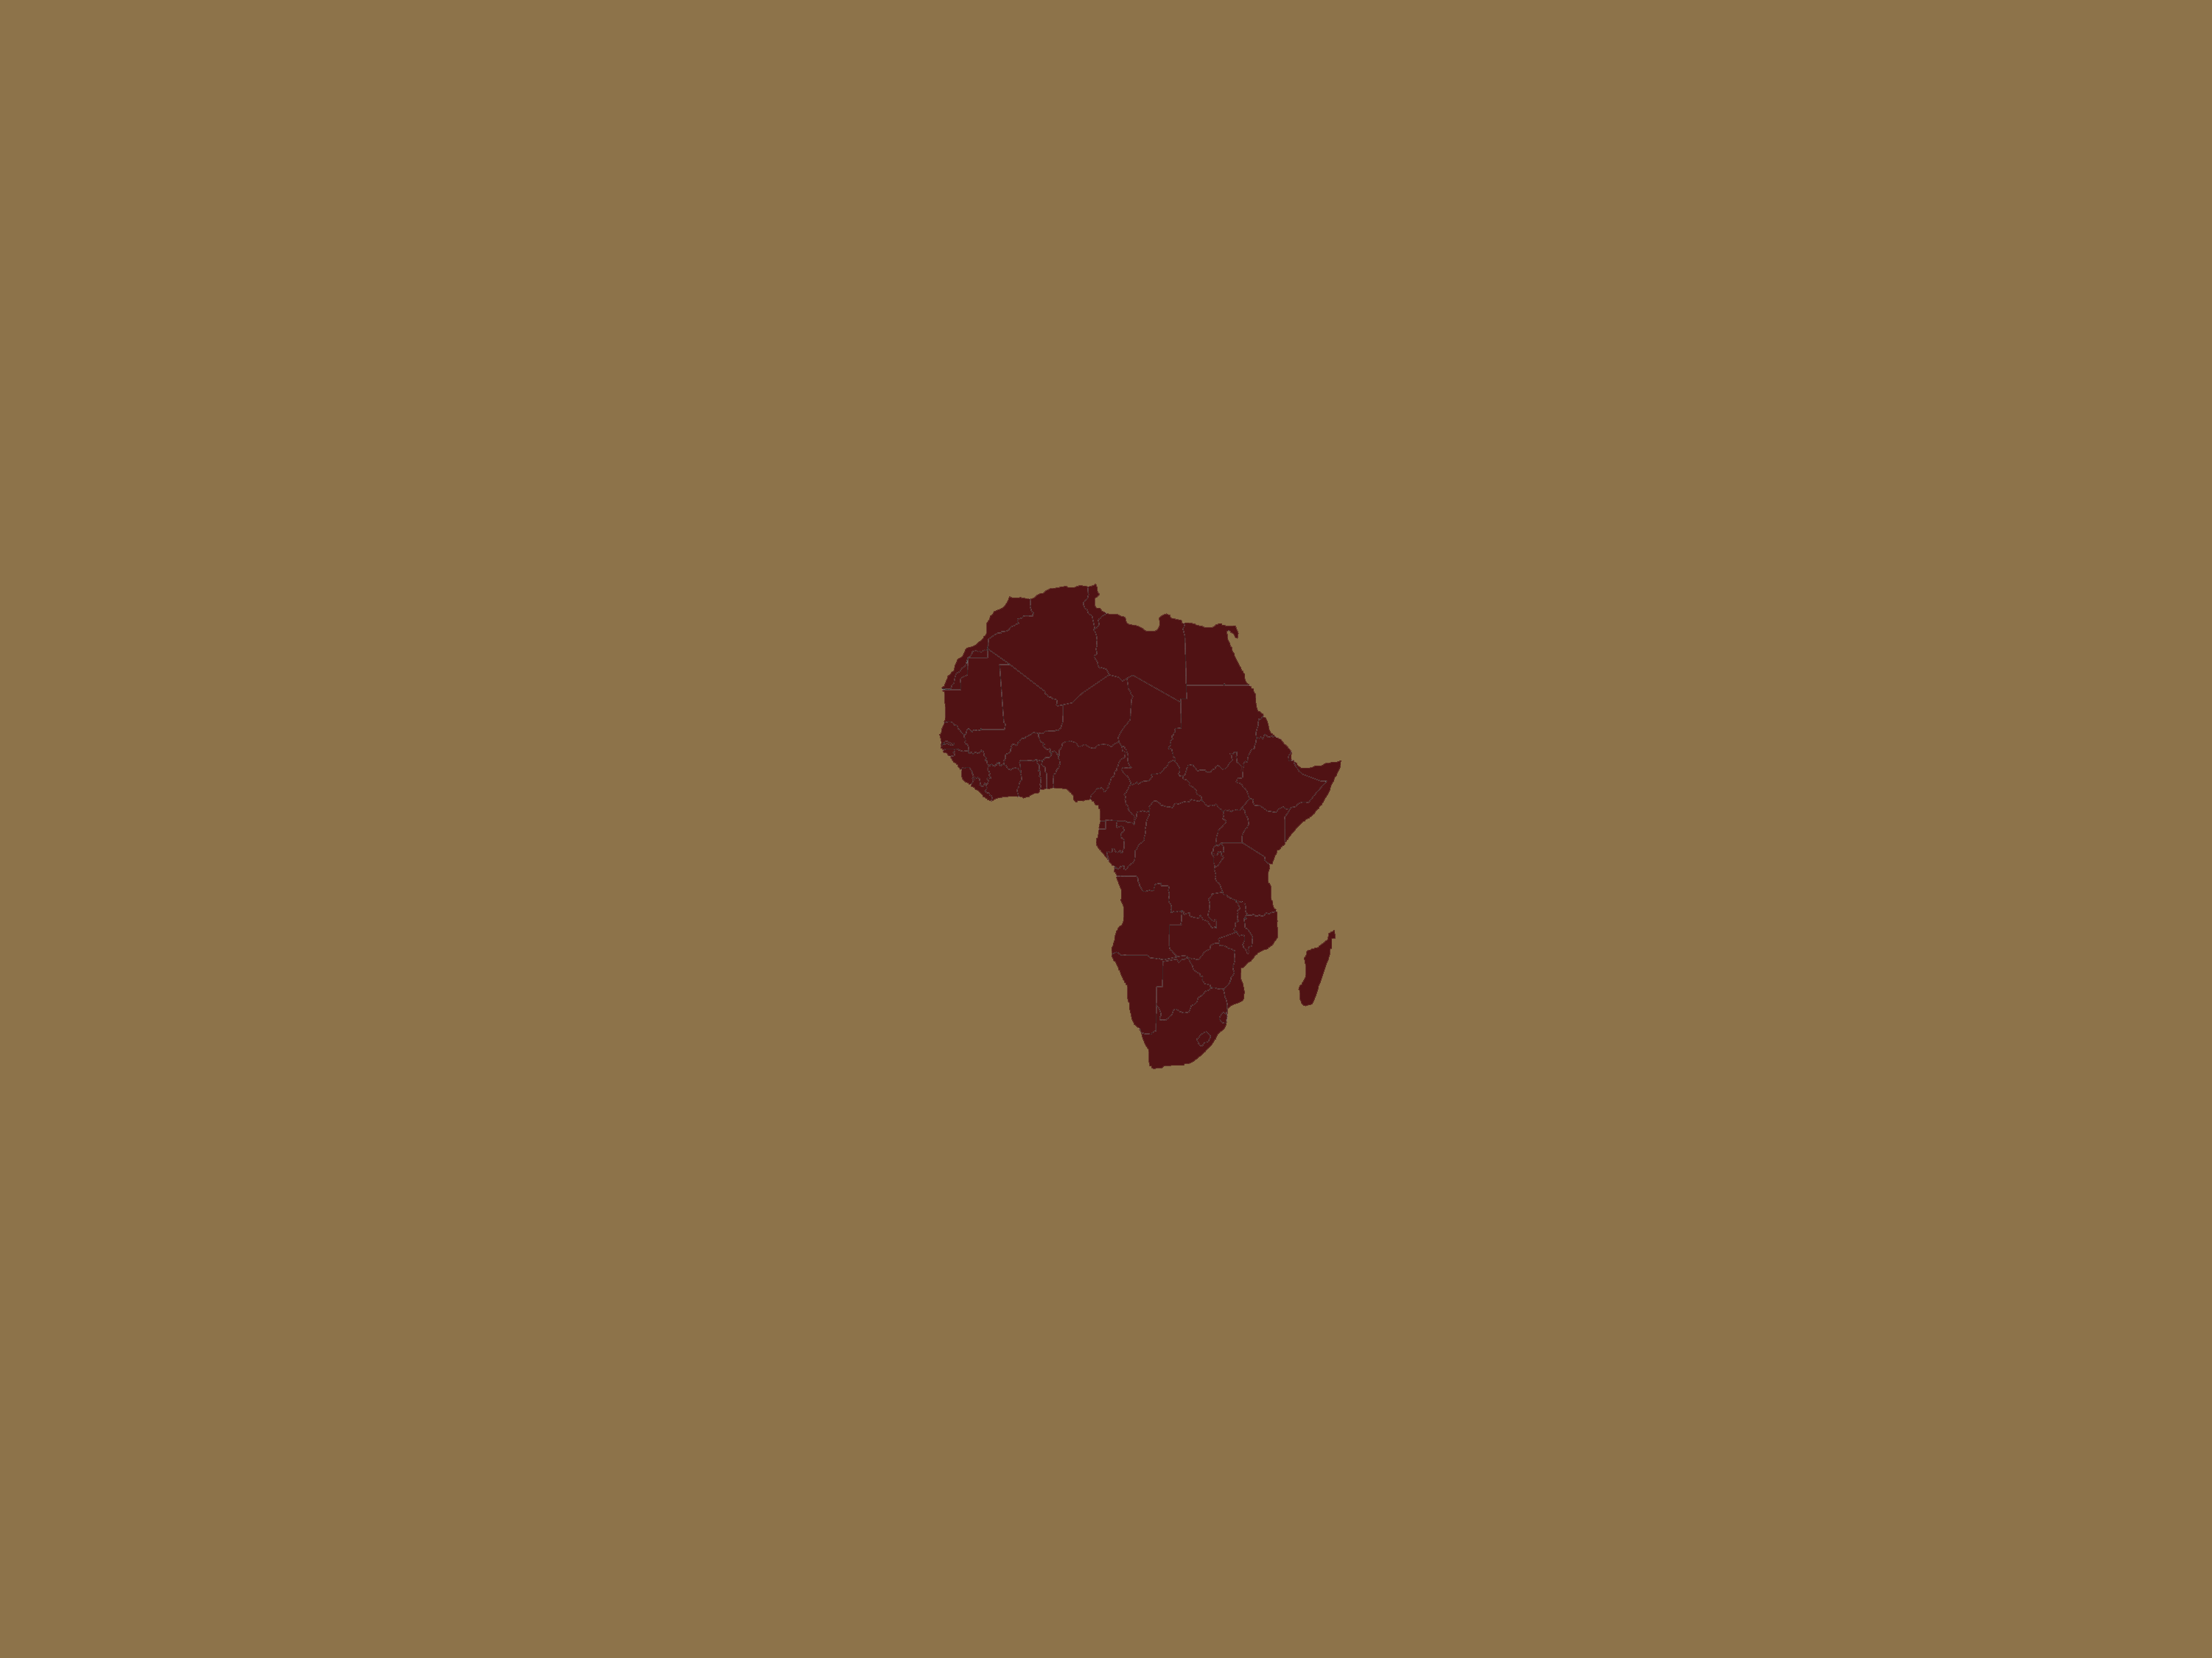 Outline of Africa